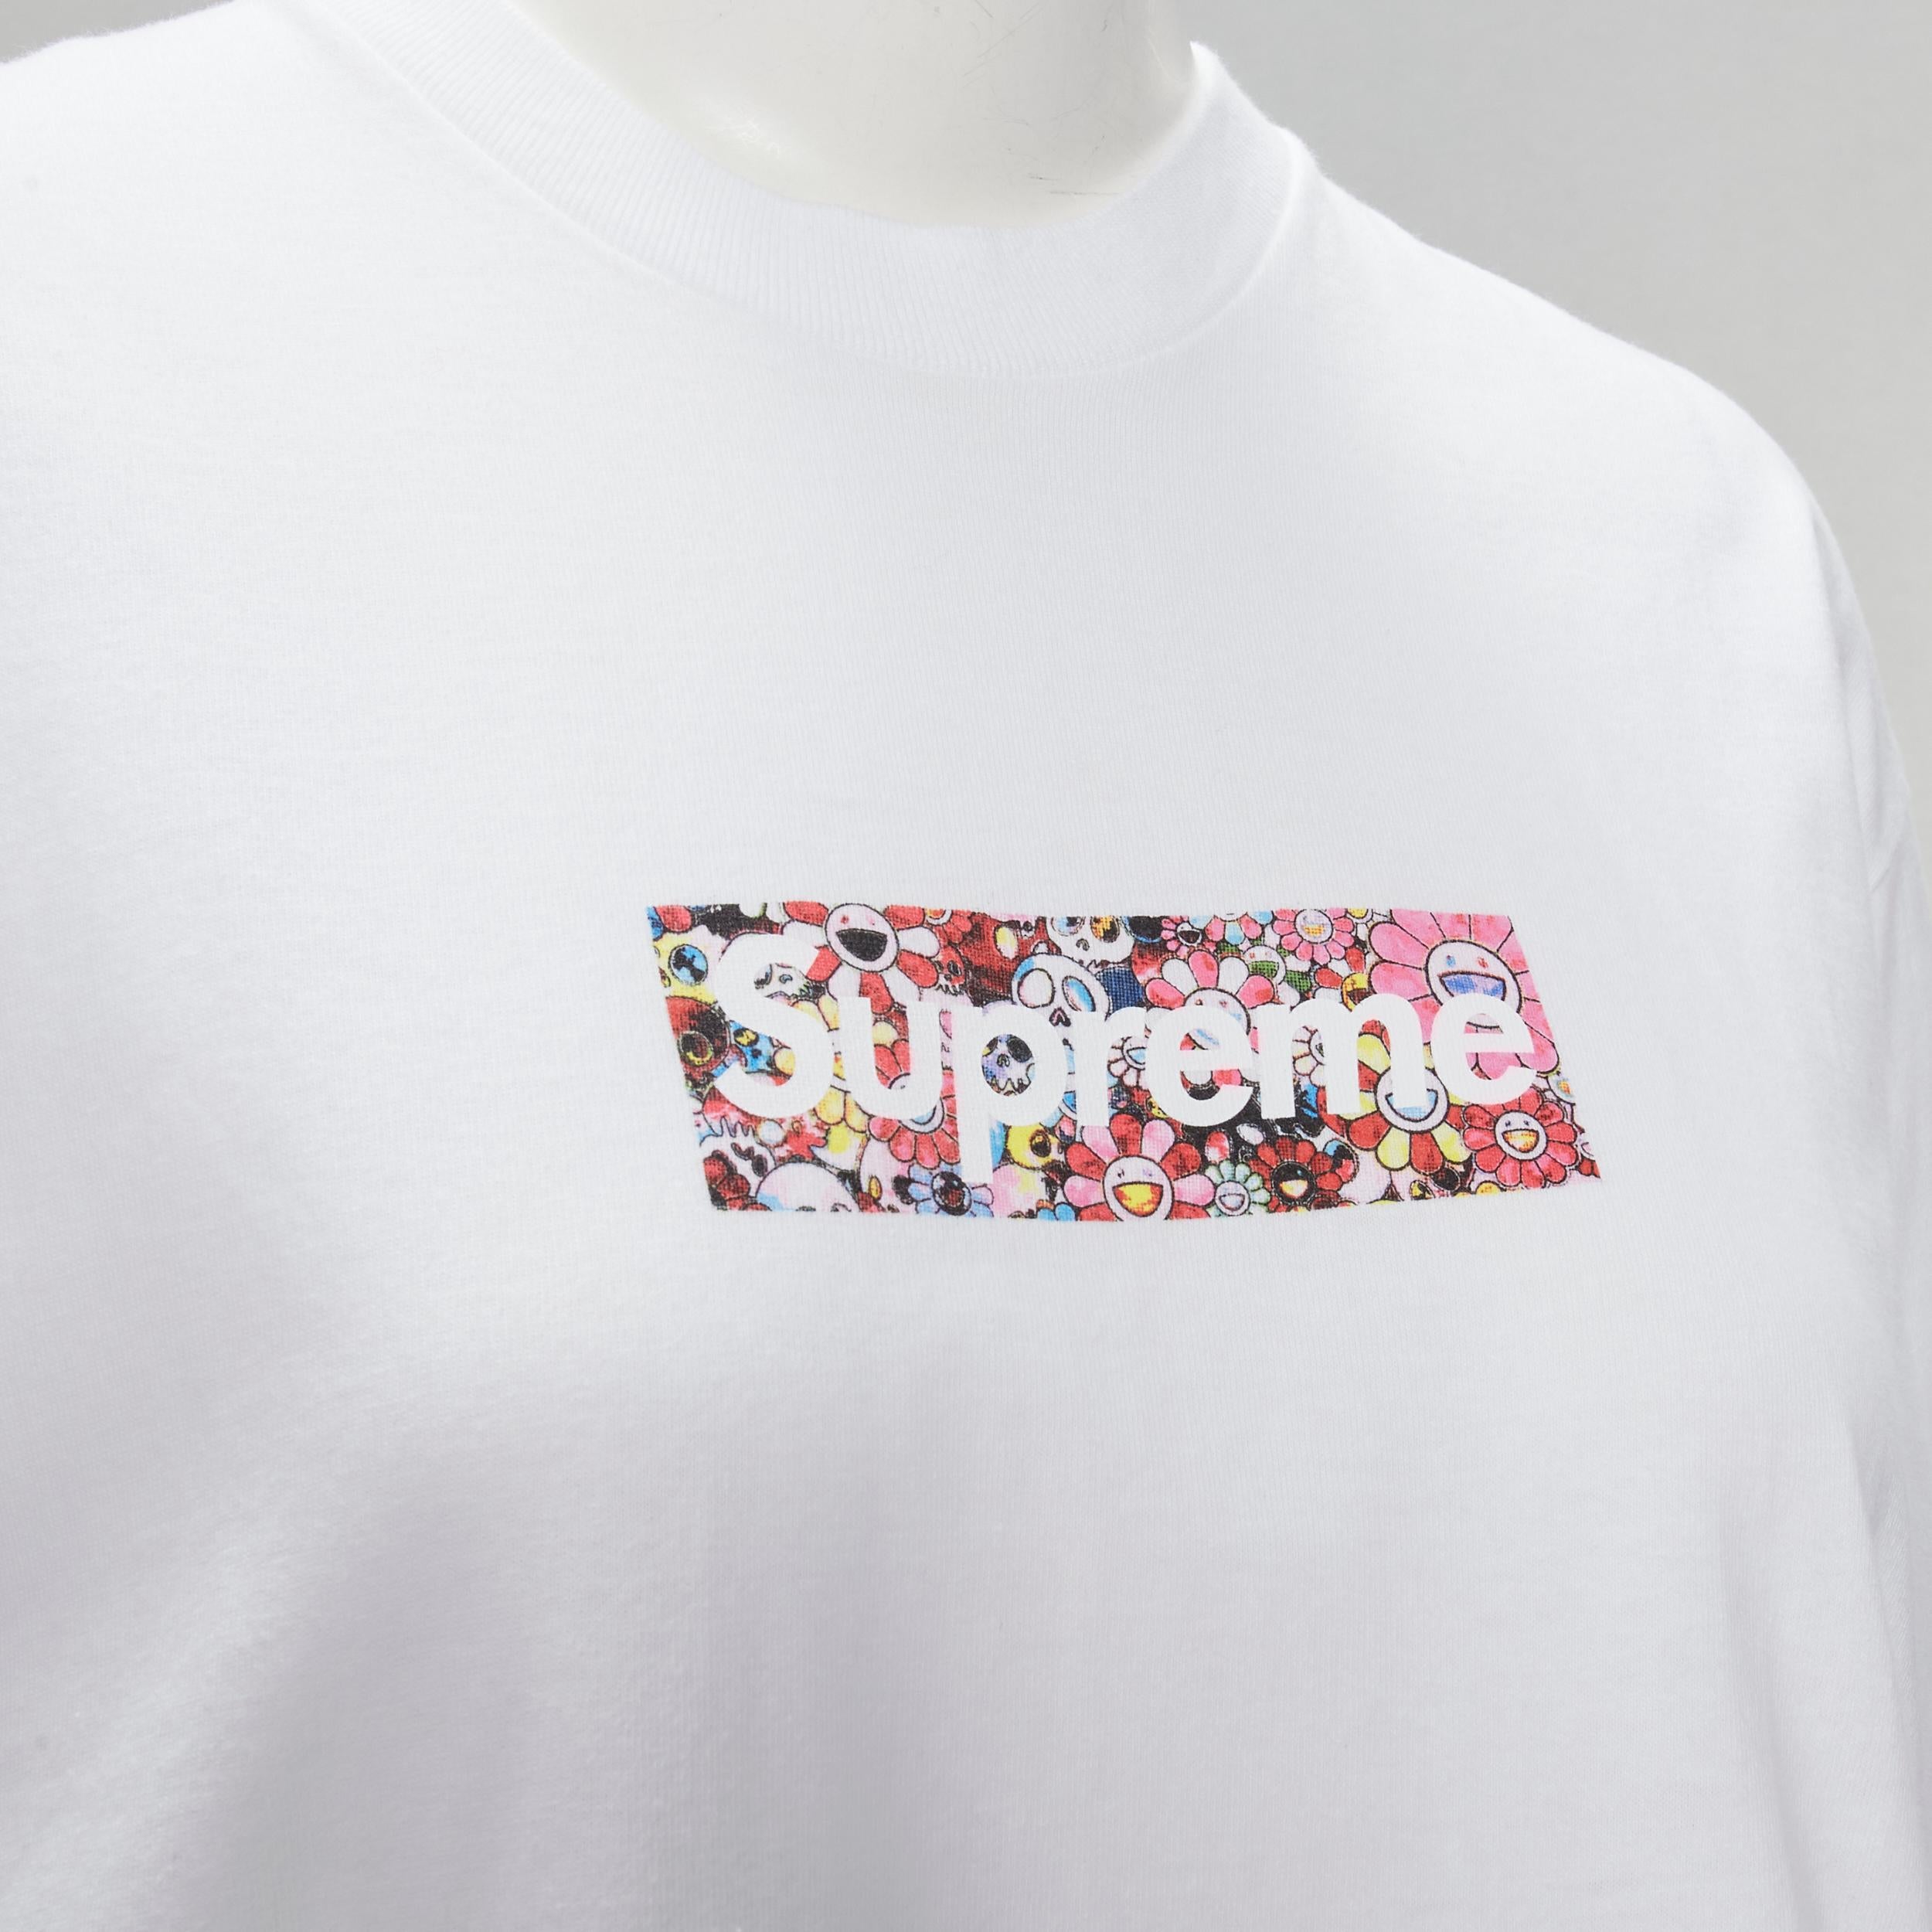 SUPREME Murakami Relief Fund floral box logo white cotton tshirt M
Brand: Supreme
Collection: Murakami Relief Fund 
Material: Cotton
Color: White
Pattern: Floral
Made in: United States

CONDITION:
Condition: Excellent, this item was pre-owned and is